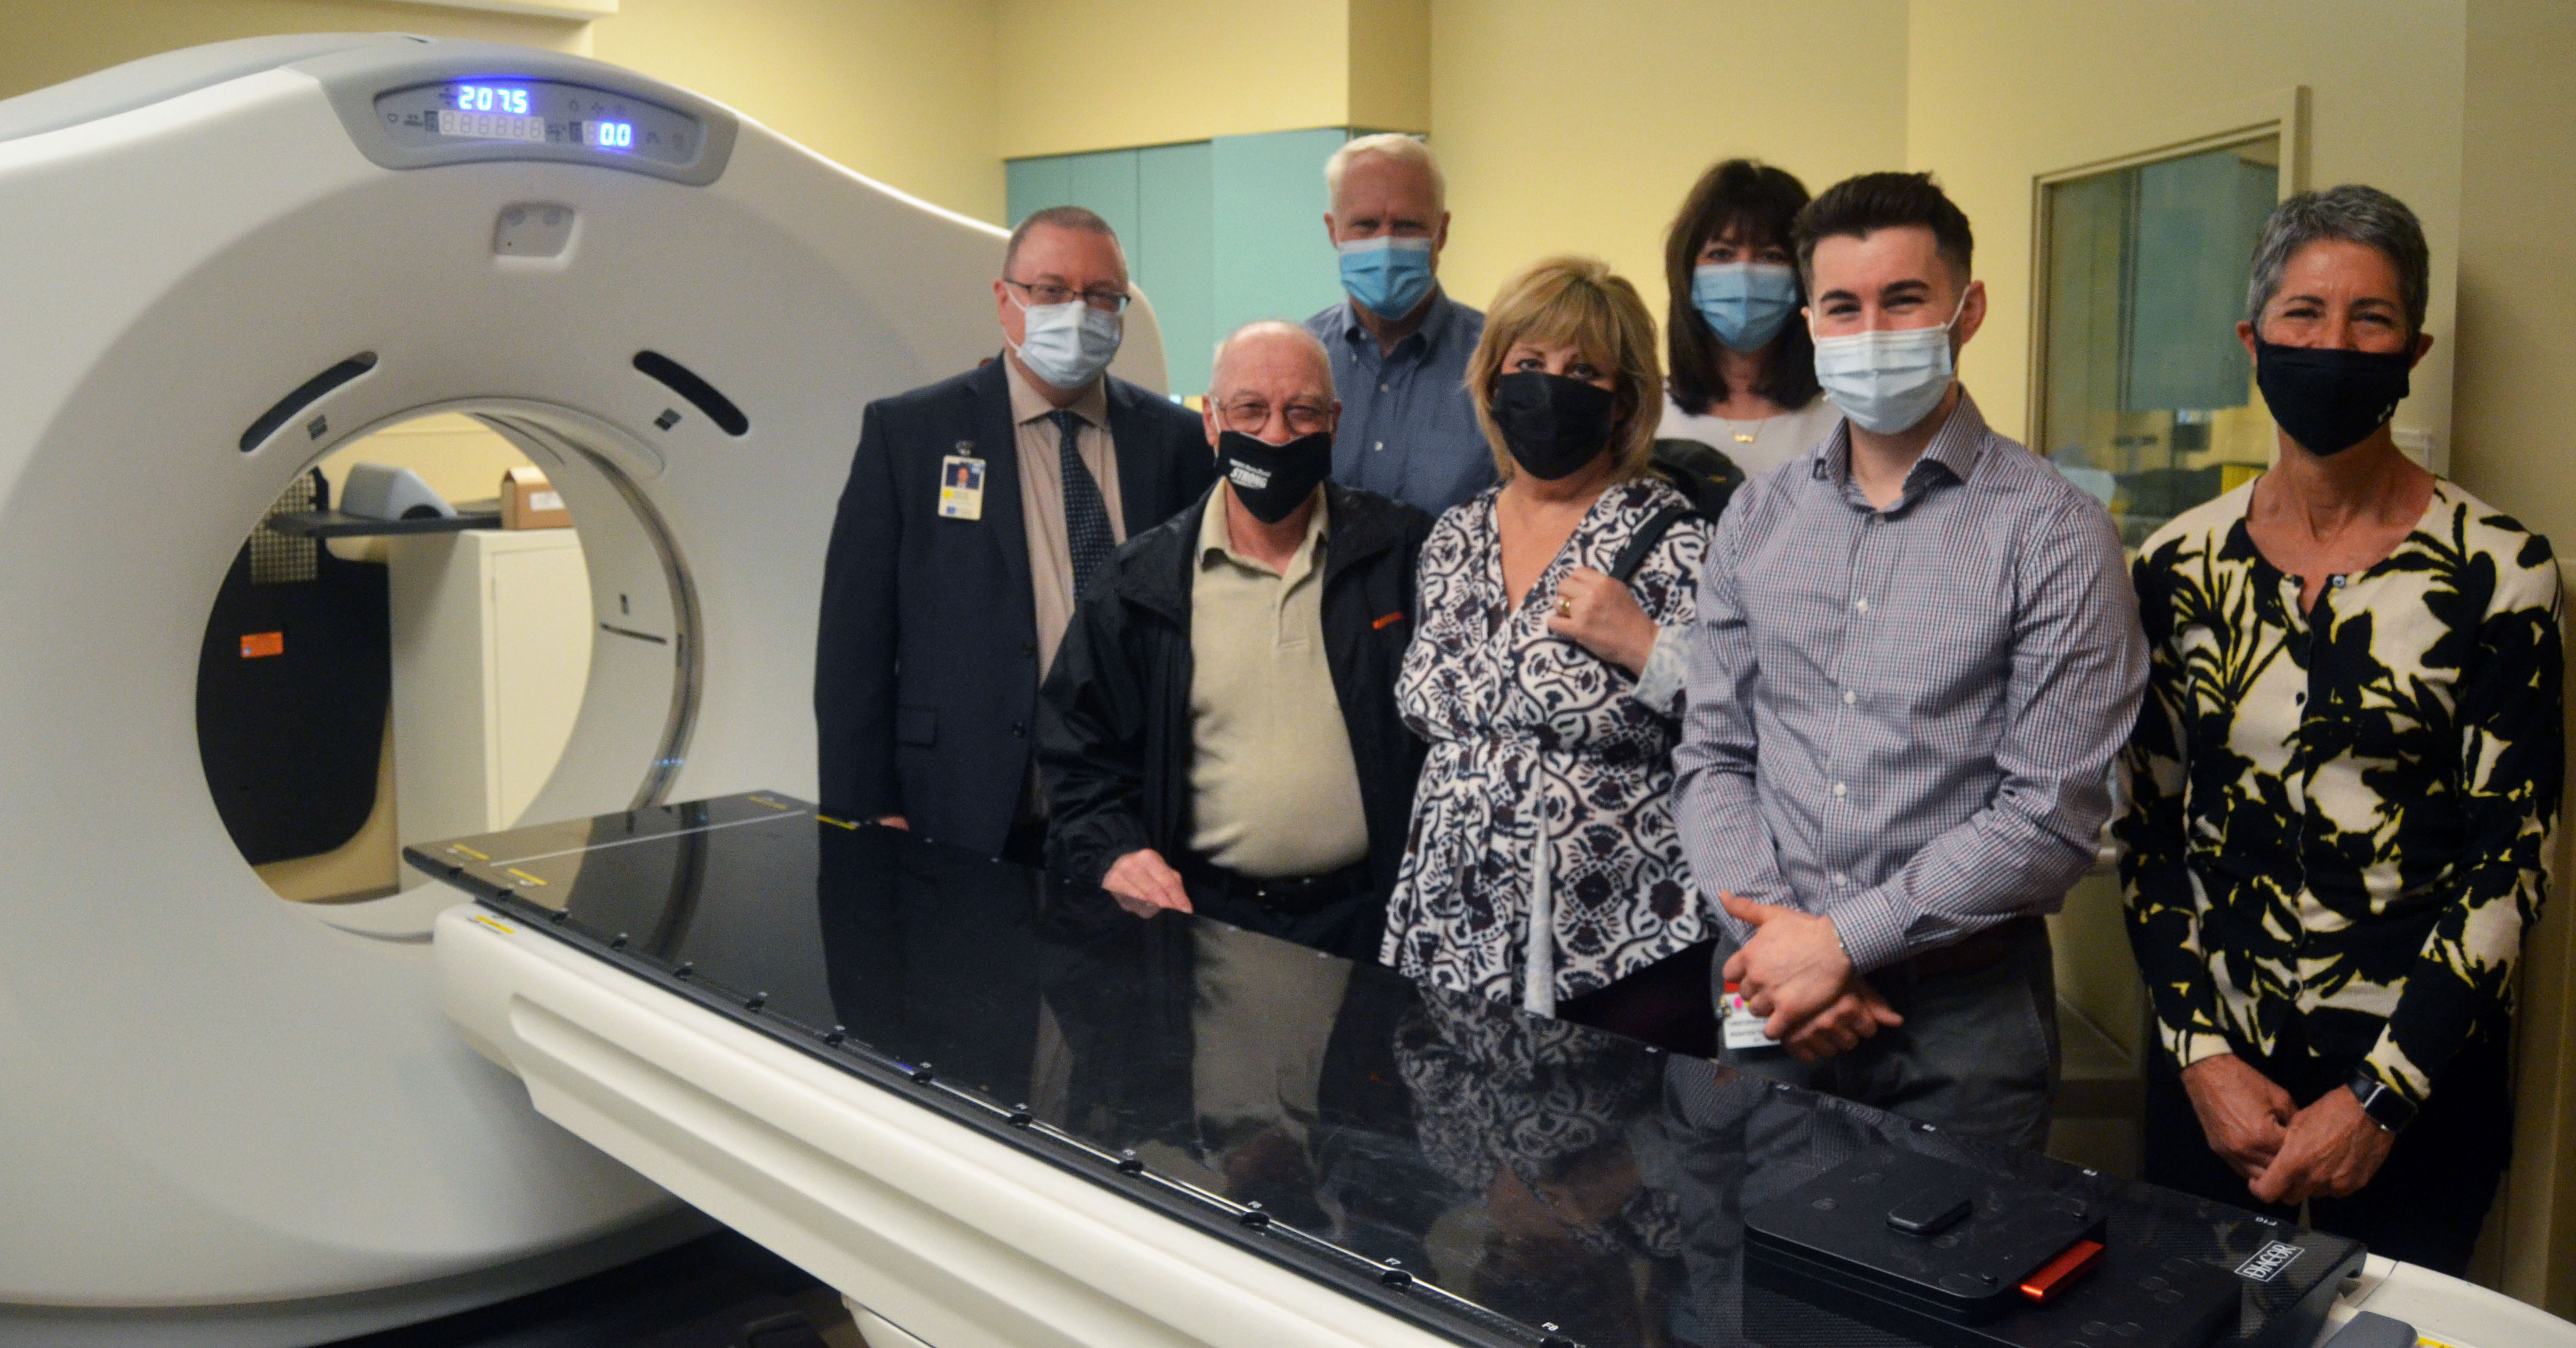 Pictured with the Mildred Milliman Radiation Medicine Center's new Computed Tomography Simulator are (from left to right) Dr. Gregory Hare, Joe Stallone, CRCF Board President Skip Wilday (back), Lisa Stallone, CRCF Executive Director Karen Niemic Buchheit, Christopher Koteras and Lucy Benson, chair of the CRCF grant allocations committee.